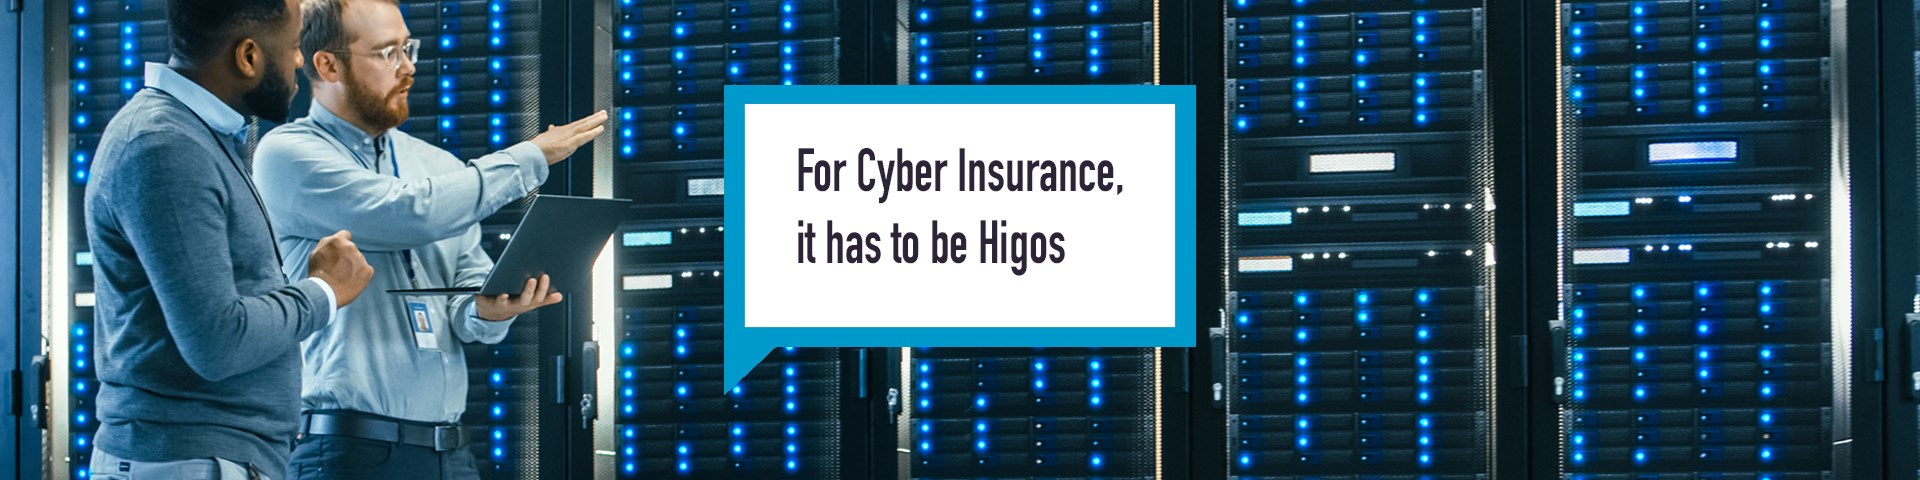 Two men in a server room, there is a banner saying ‘For Cyber Insurance, it has to be Higos’